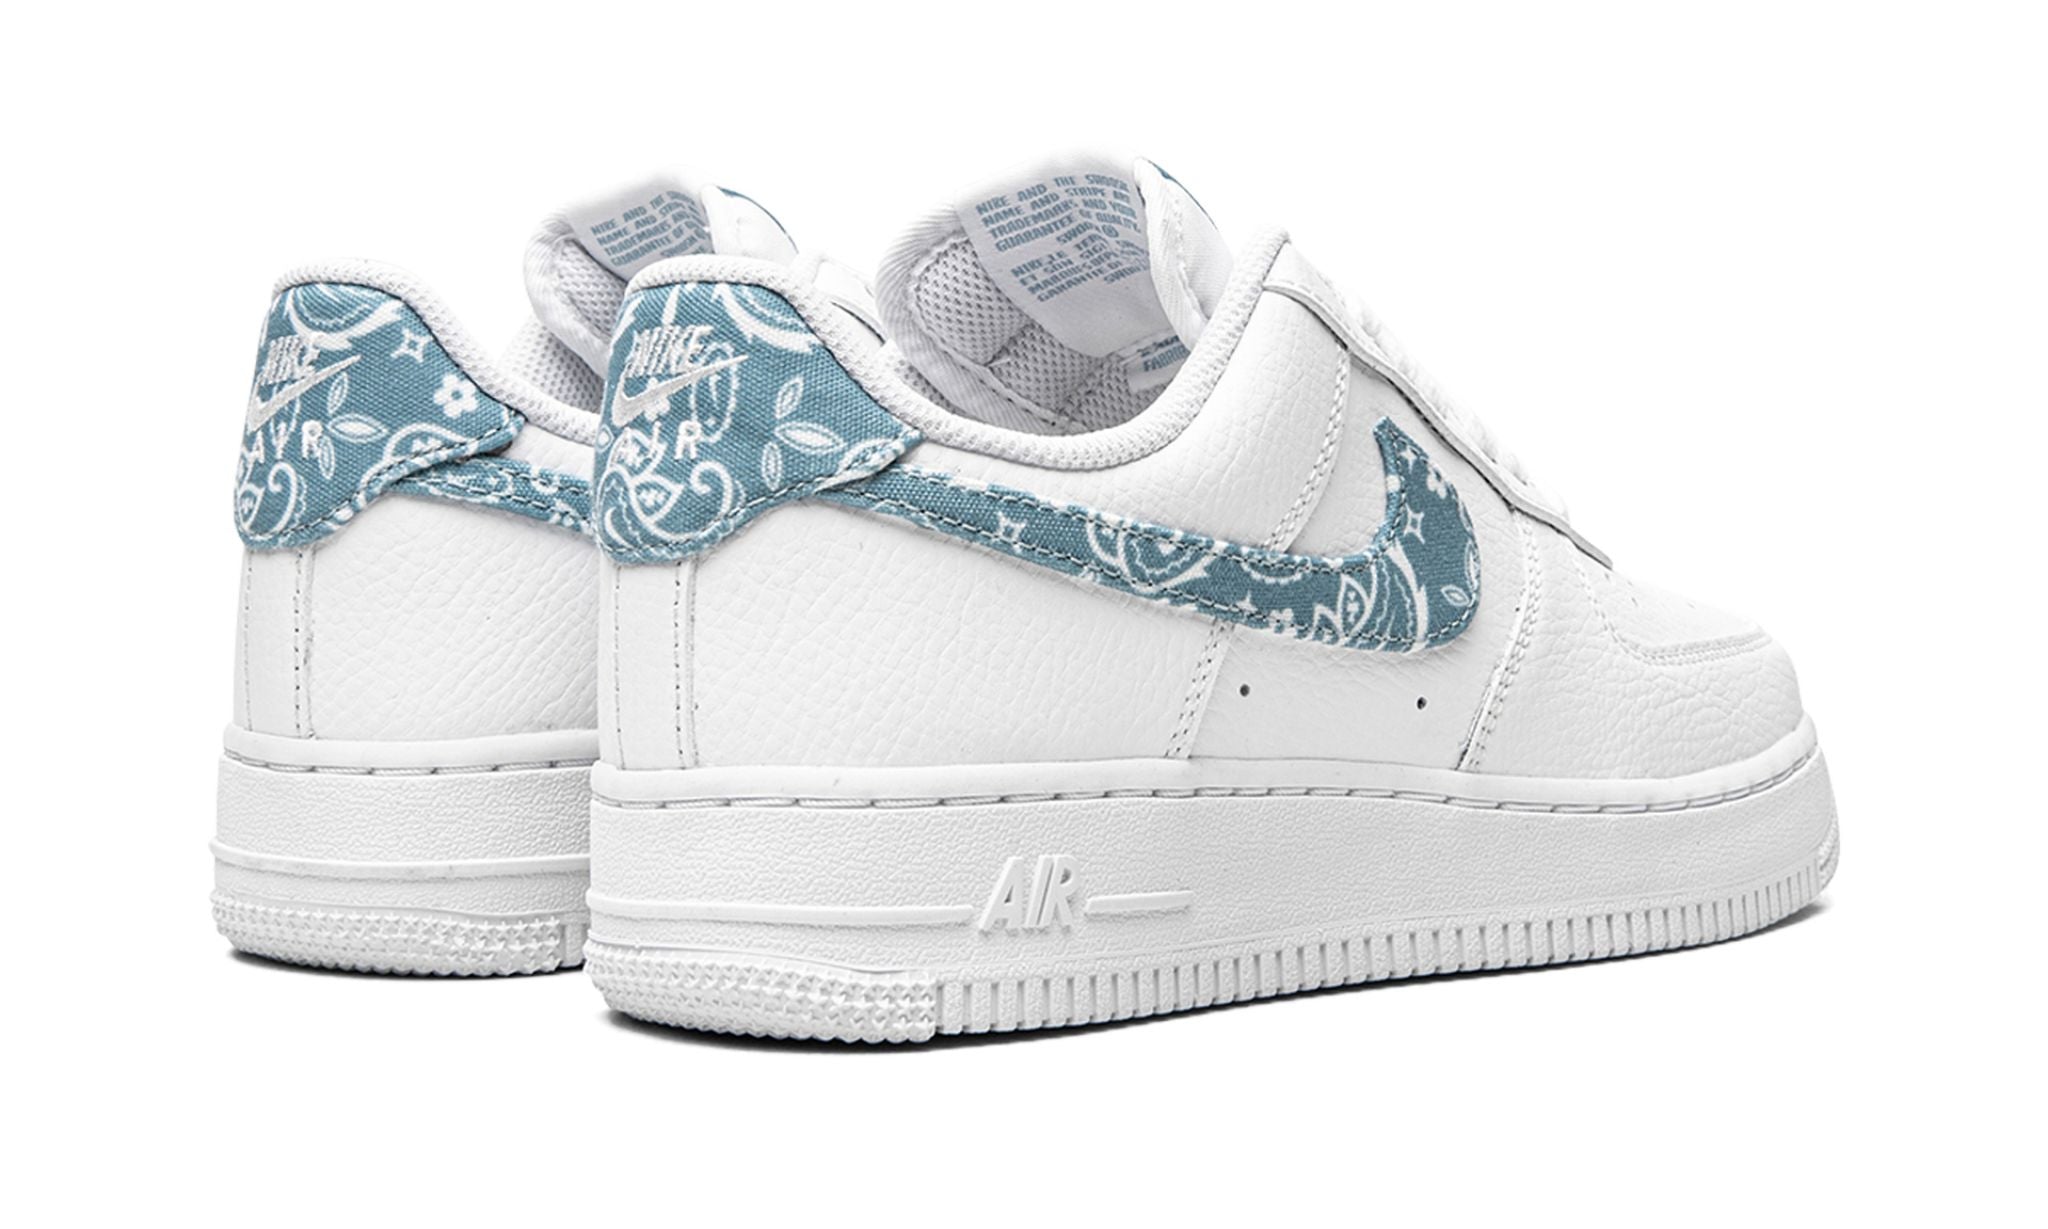 Nike Air Force 1 Low Paisley blue 欲しいの 51.0%OFF www ...